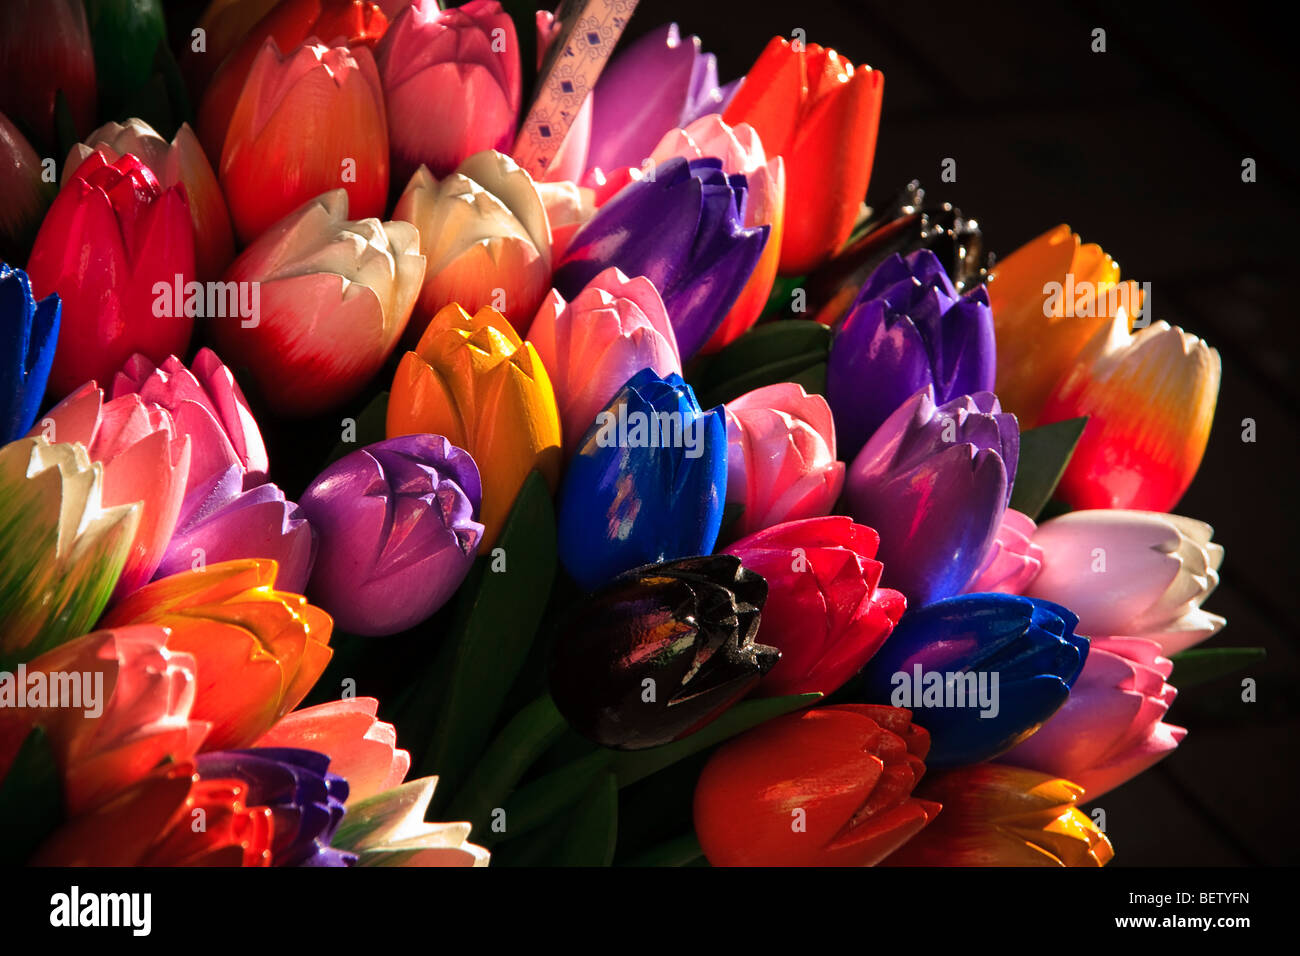 A display of tulips carved out of wood at a market in Amsterdam Netherlands Stock Photo